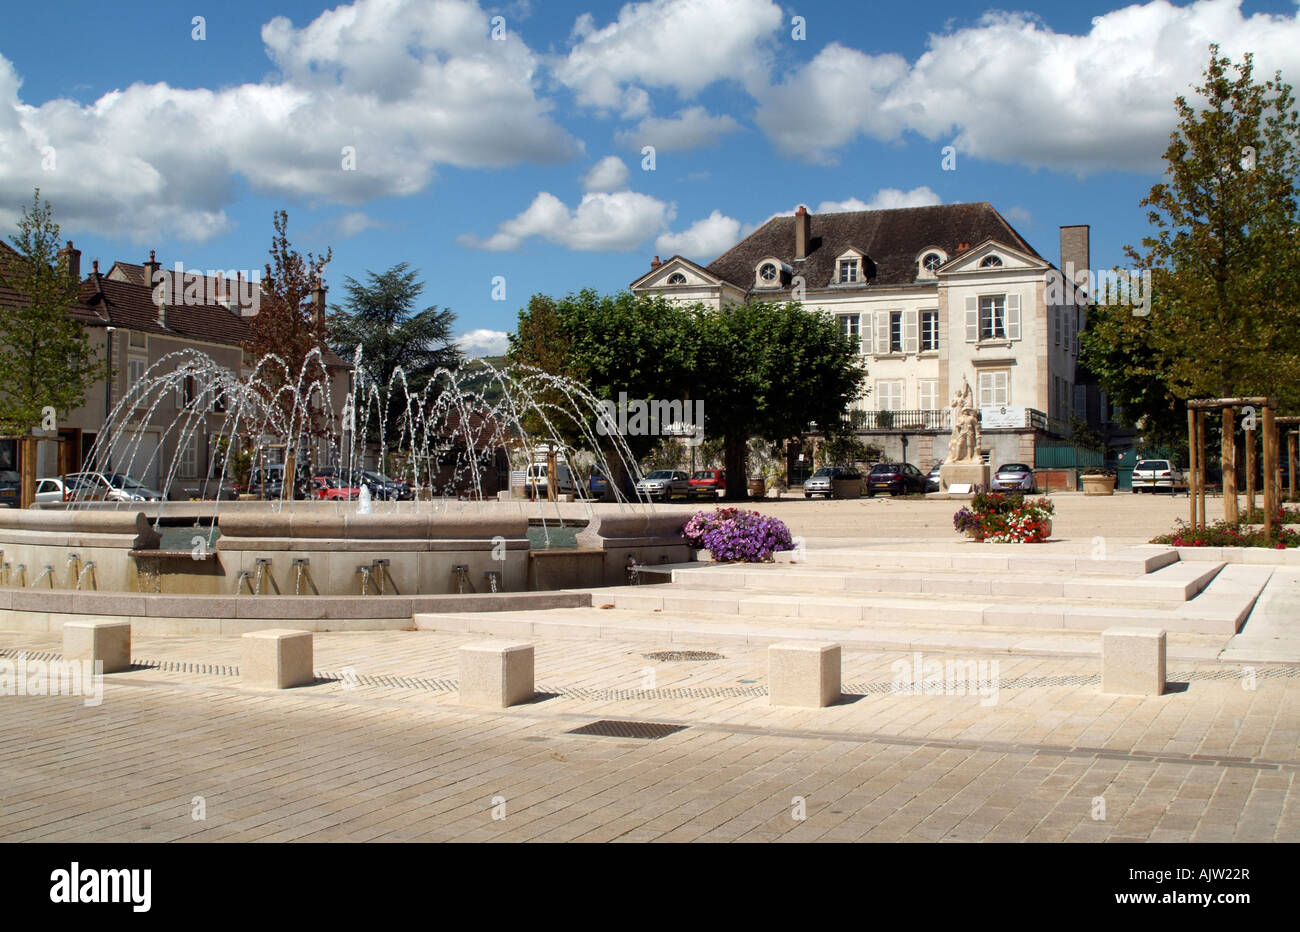 Town Centre of Santenay in The Cote de Beaune Region of France Fountain on the Town Square outside the Town Hall Building Stock Photo